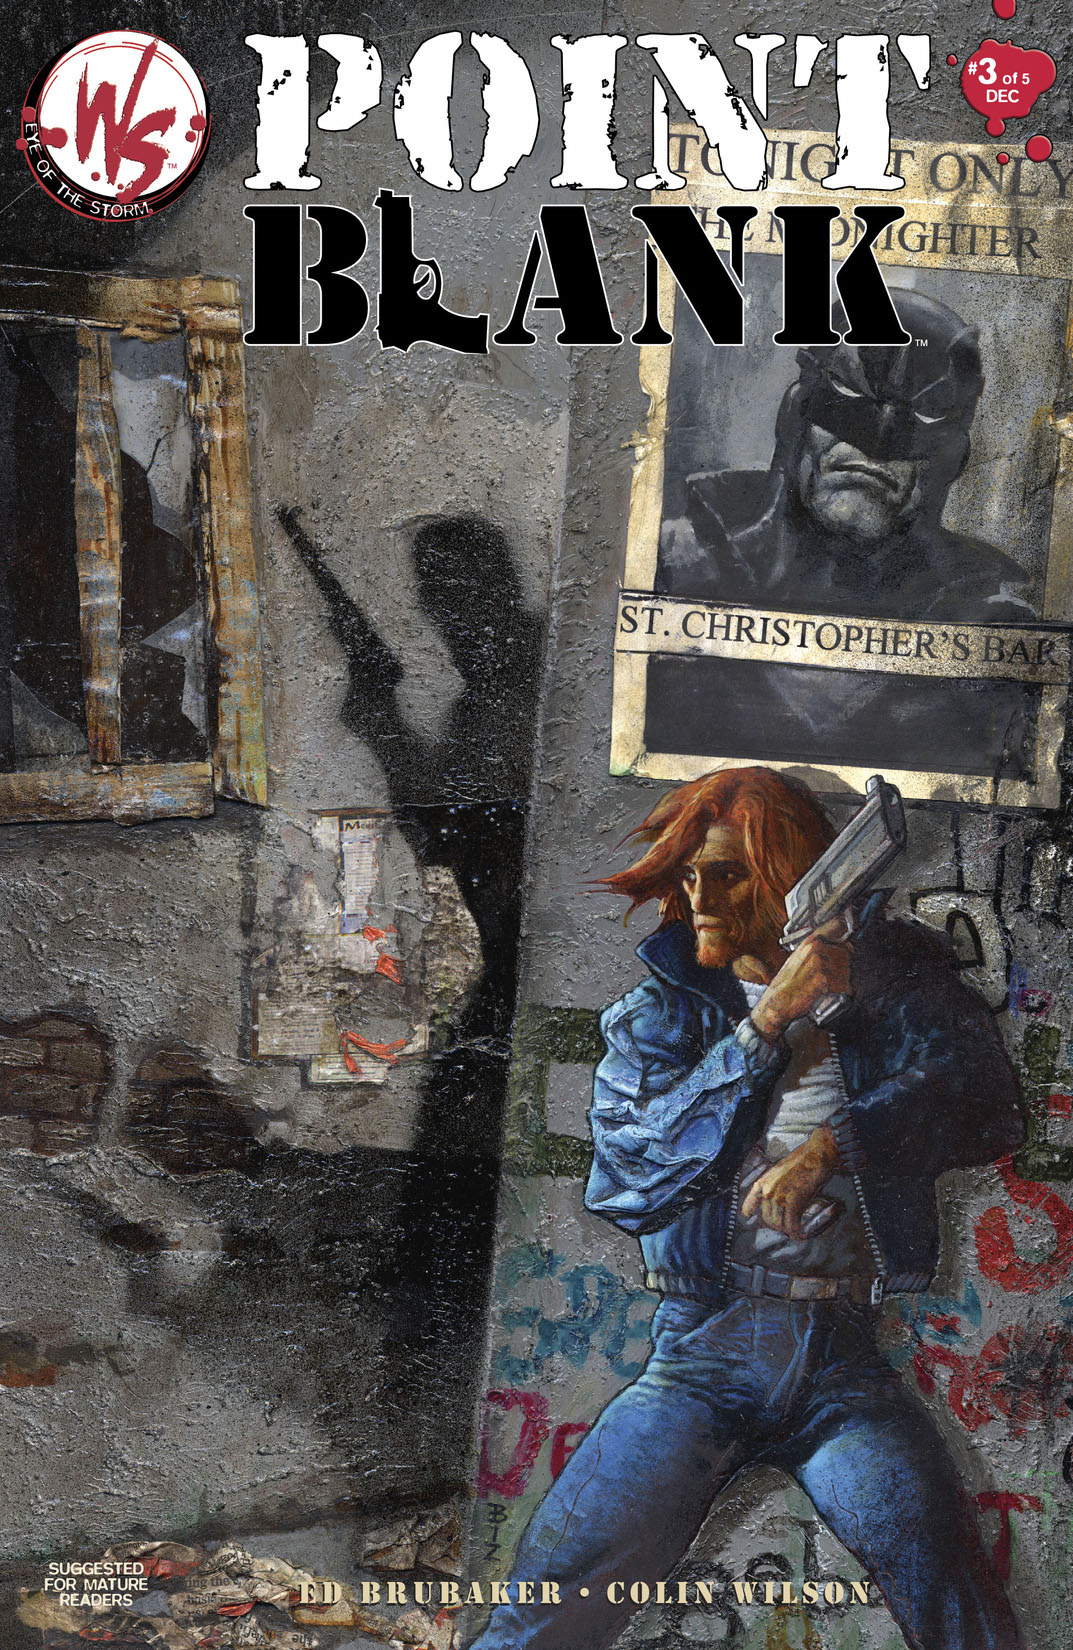 Point Blank #3 preview images